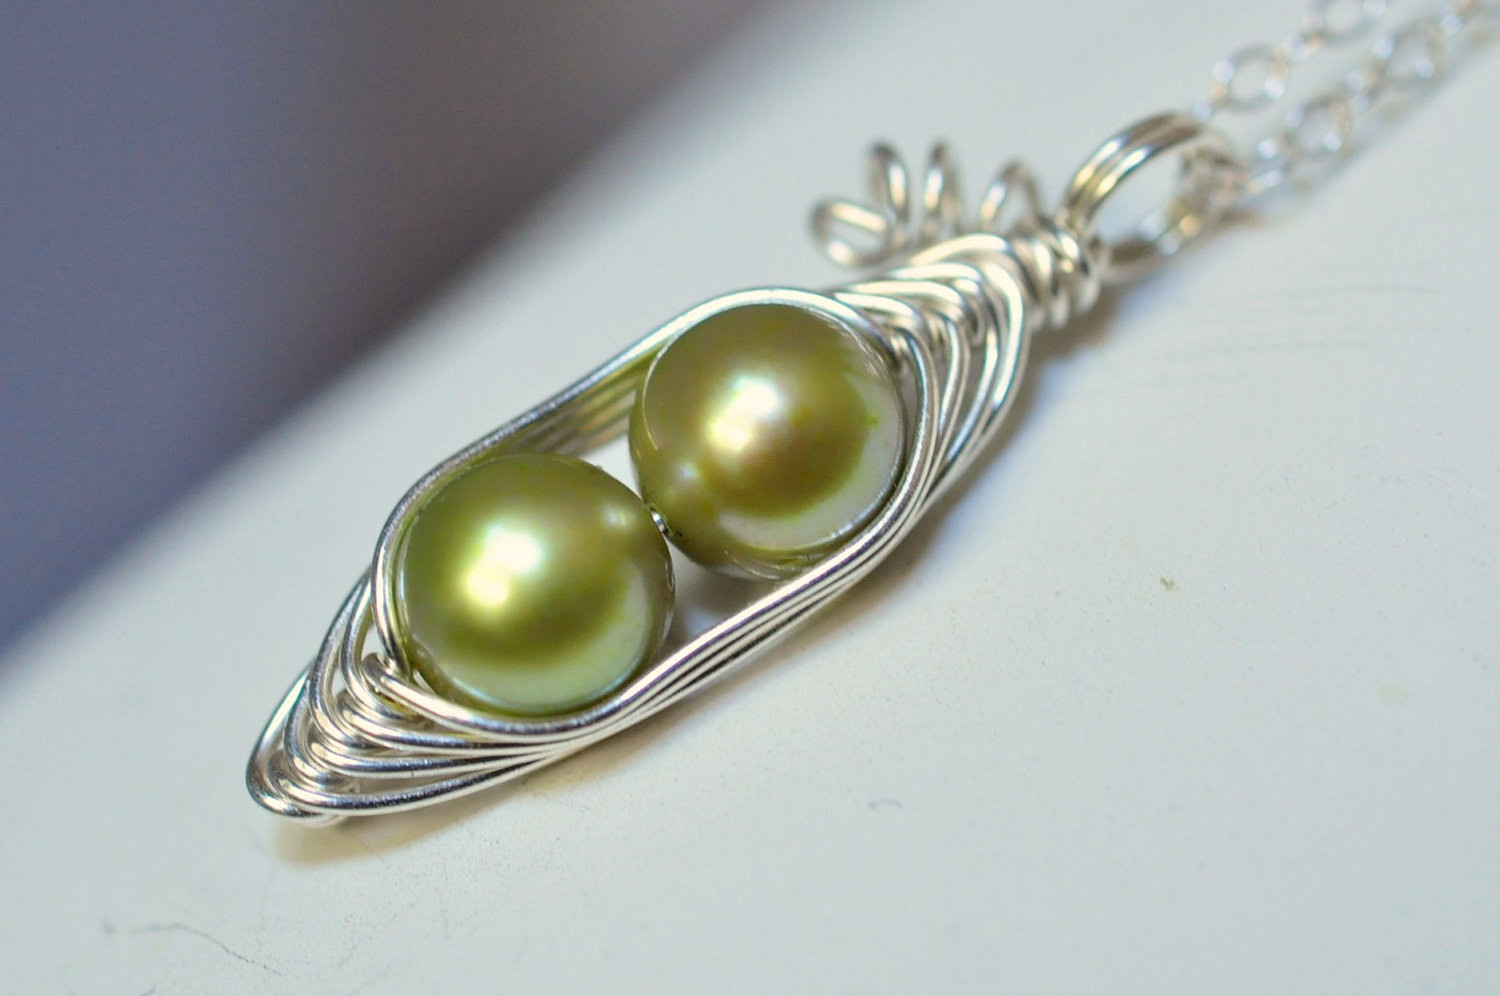 Two Peas In A Pod Necklace
 Two peas in a pod necklace mothers necklace peapod